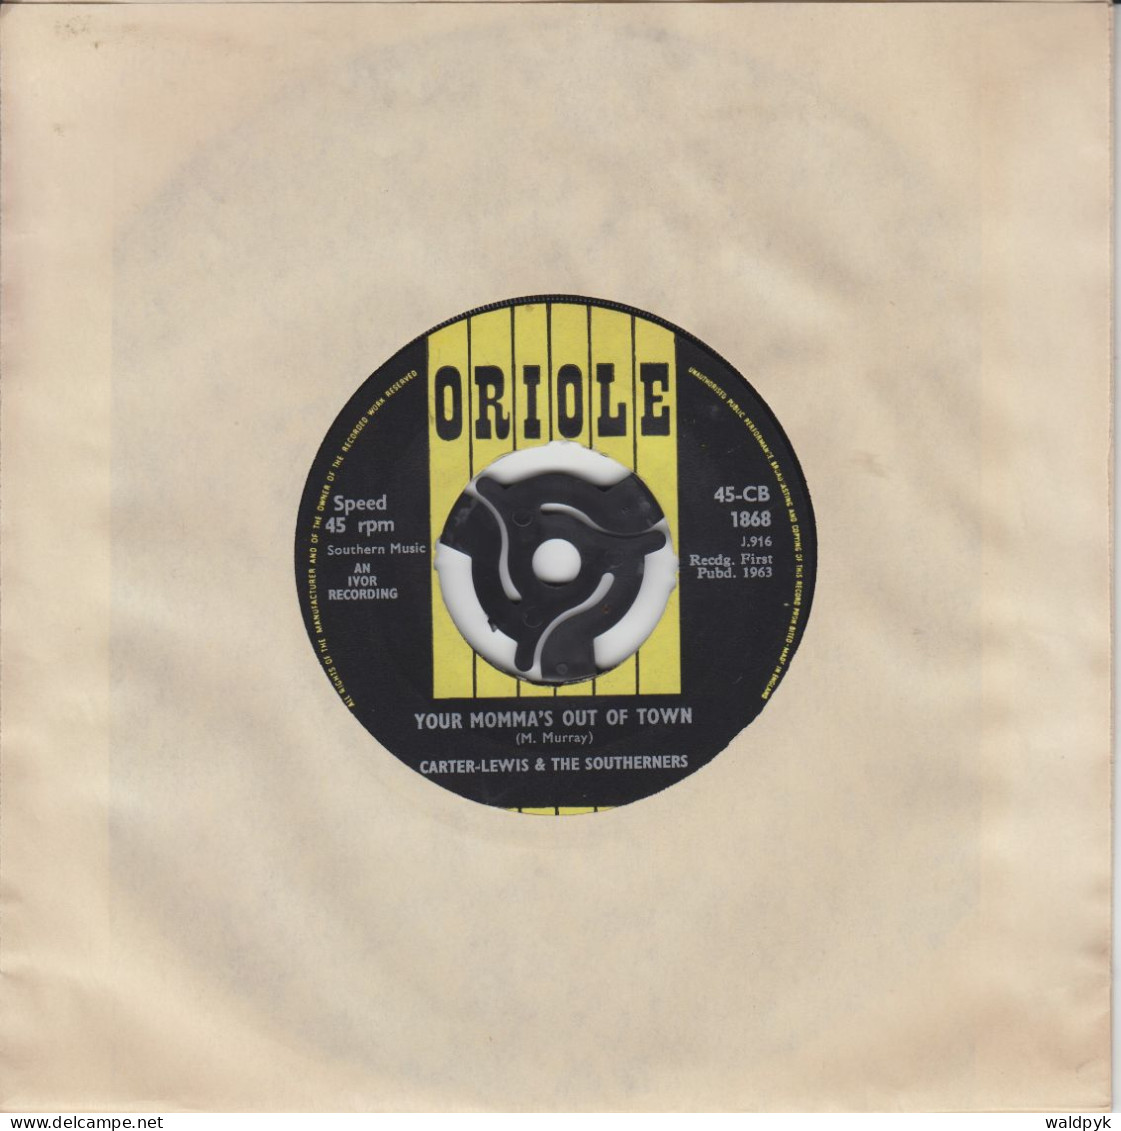 CARTER-LEWIS & THE SOUTHERNERS - Your Momma's Out Of Town - Other - English Music